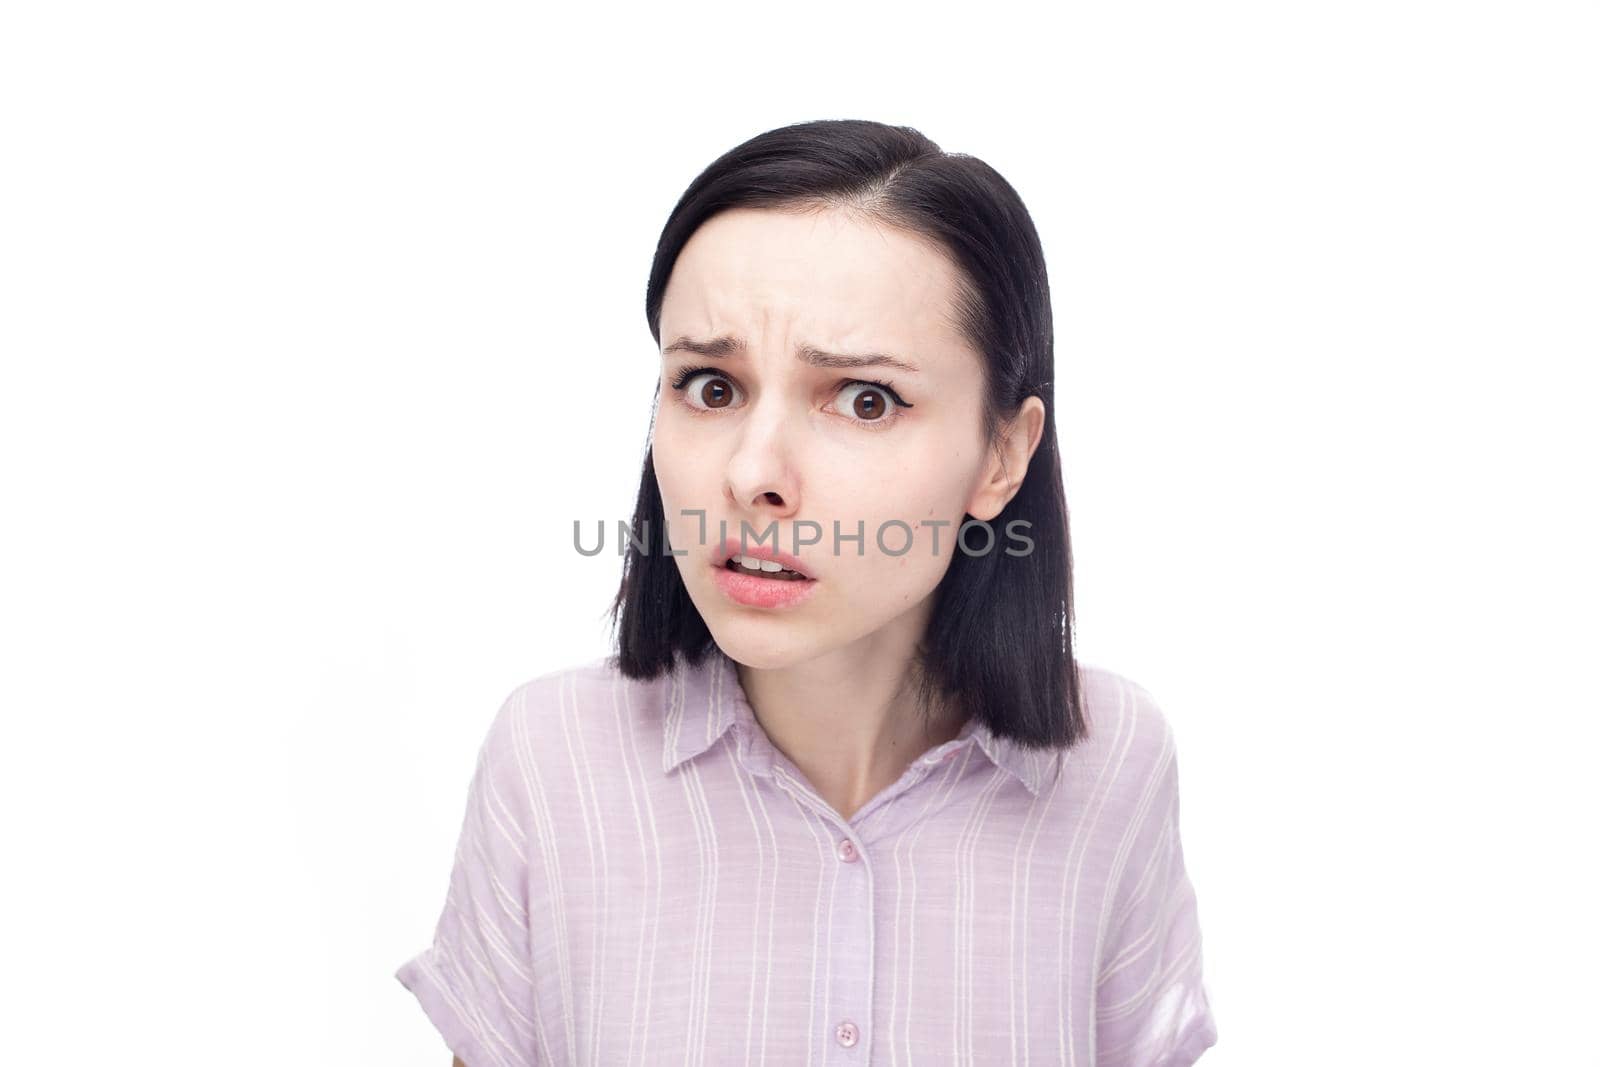 displeased shocked woman in purple shirt, white background. High quality photo